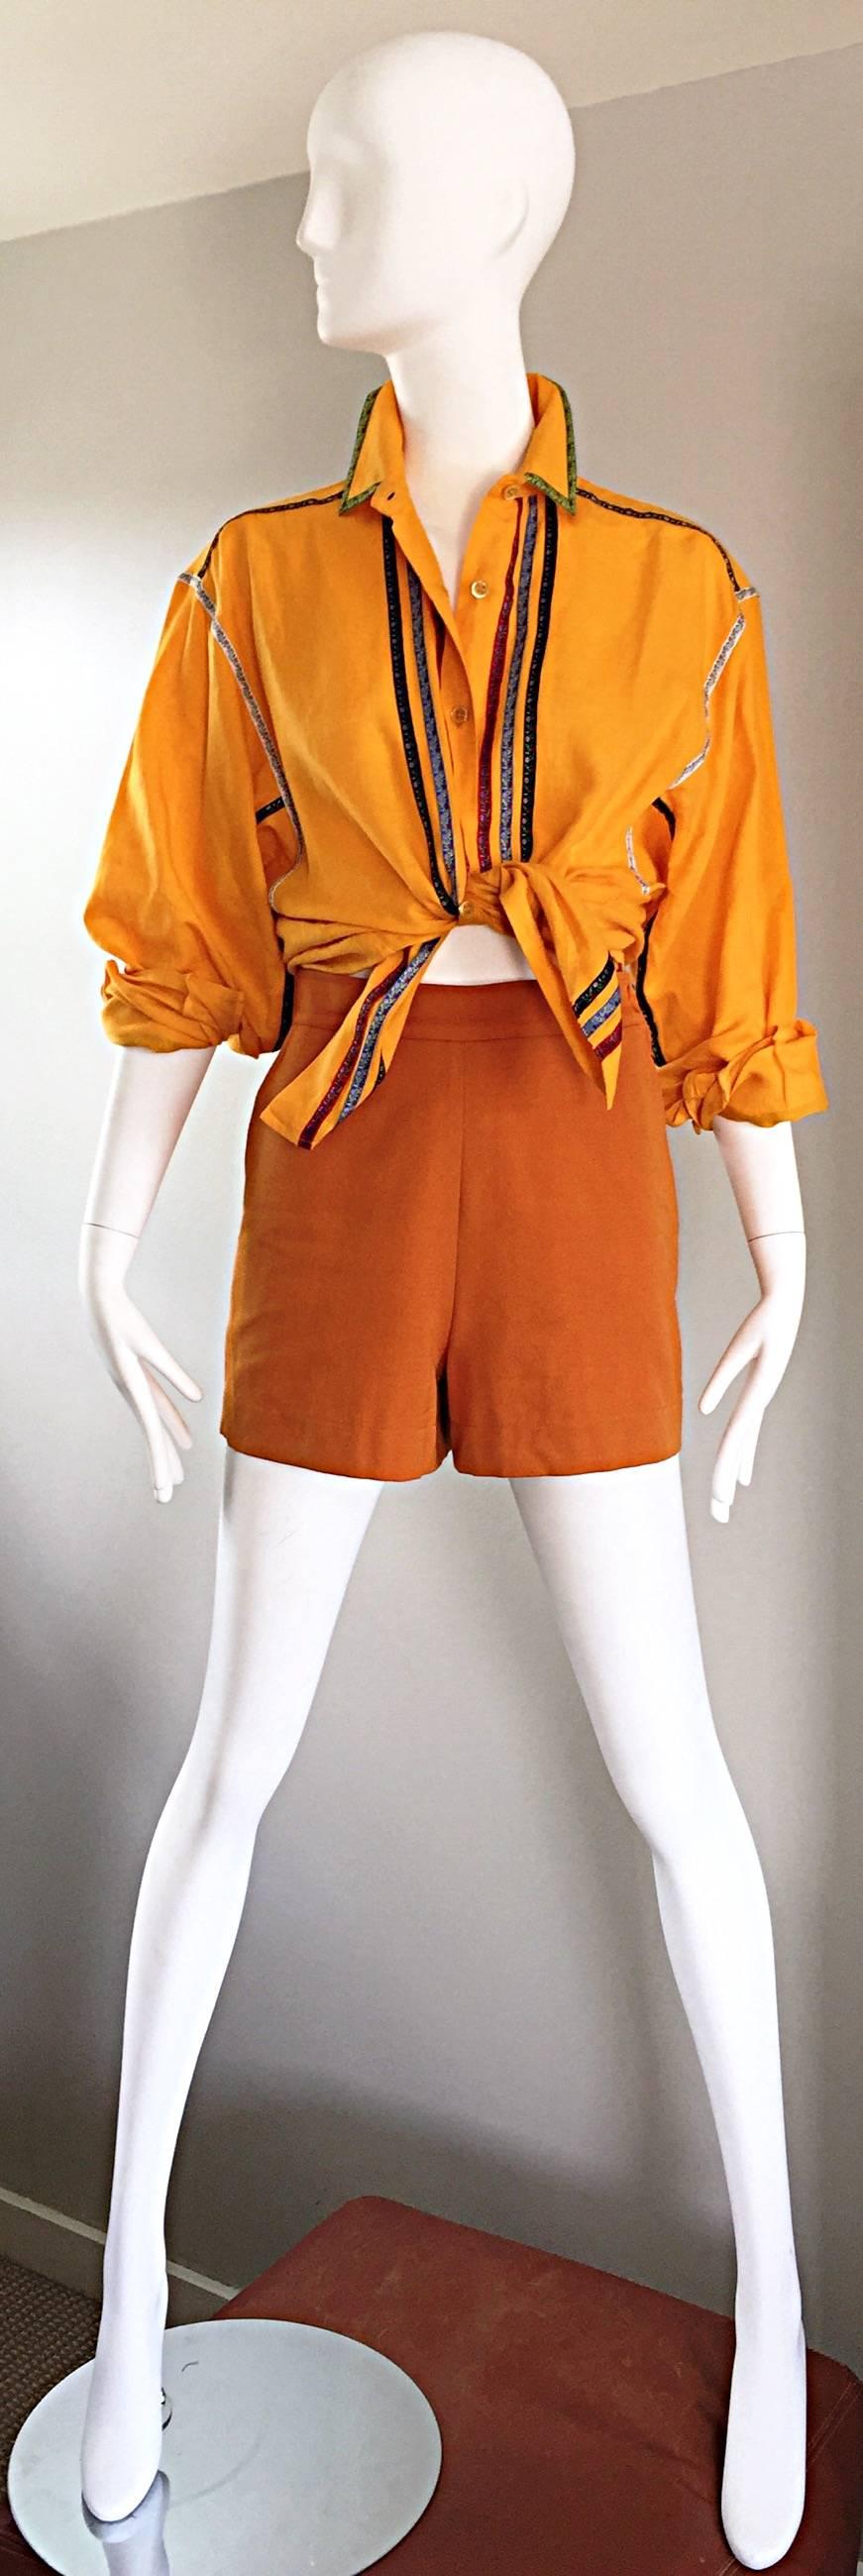 Wonderful vintage KENZO 90s marigold yellow cotton and linen long sleeve dolman blouse! Vibrant marigold color with strips of embroidered flower ribbons throughout. Buttons up the bodice, and at each sleeve cuff. Chic dolman sleeves make this gem